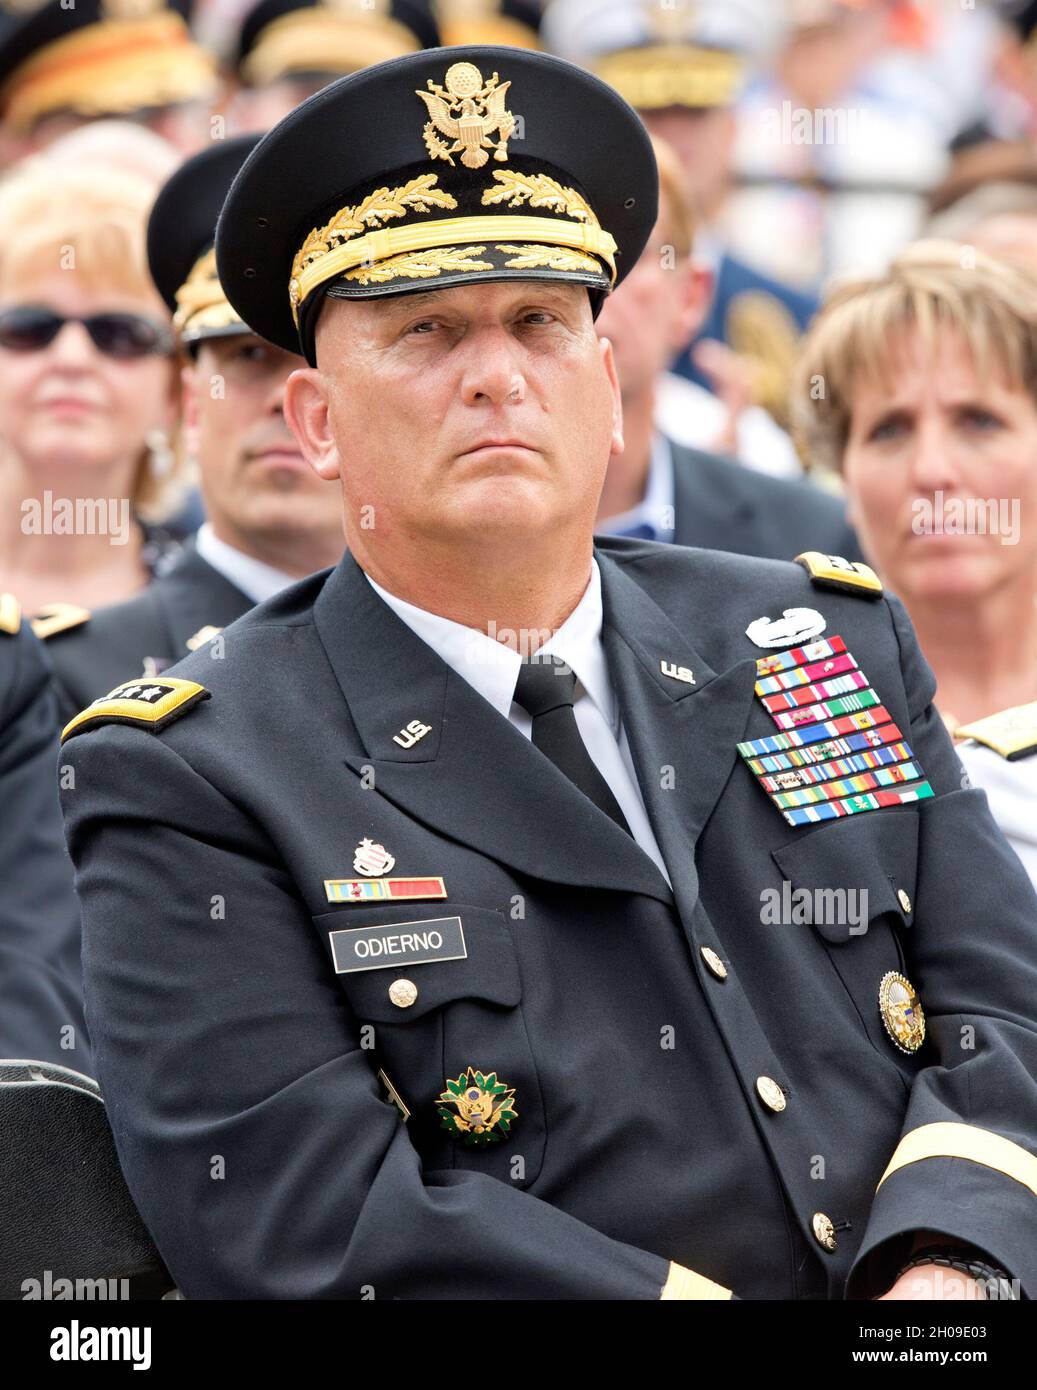 United States Army General Raymond T. "Ray" Odierno, Chief of Staff of the Army, listens as United States President Barack Obama delivers remarks marking the 60th Anniversary of the Korean War Armistice at the Korean War Veterans Memorial in Washington, D.C. on Saturday, July 27, 2013.Credit: Ron Sachs / Pool via CNP /MediaPunch Stock Photo